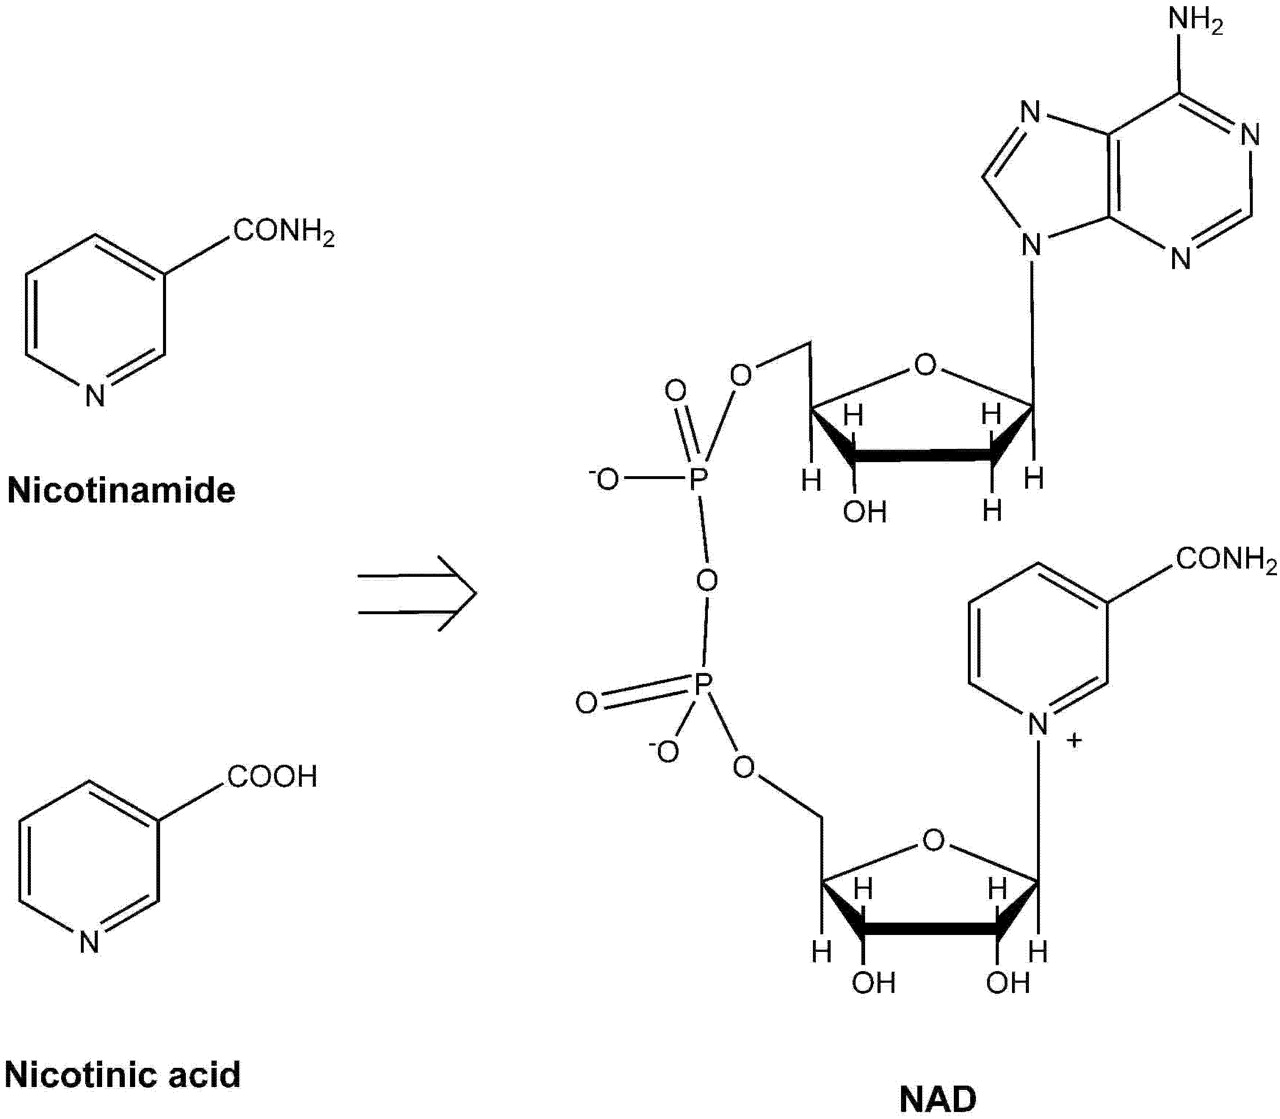 A diagram showing the molecular structures of Nicotinamide and Nicotinic acid, and their conversion to the more complex molecule, NAD